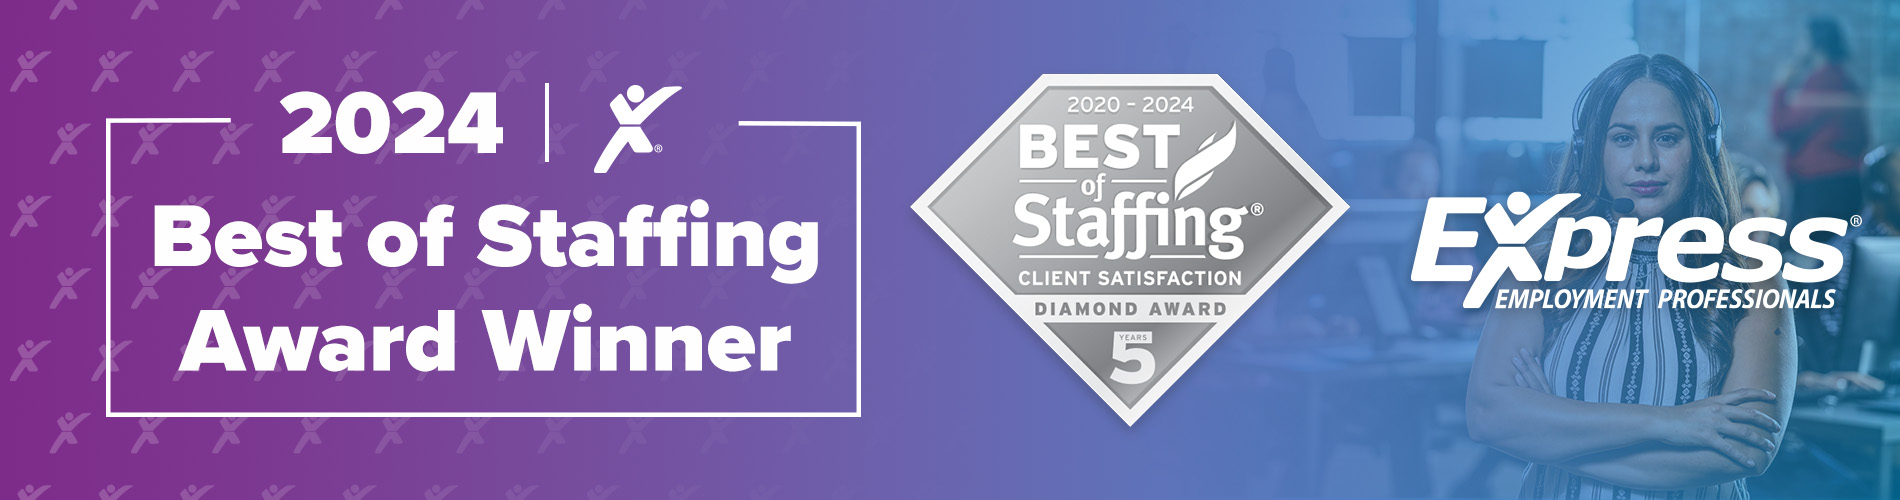 real best of staffing